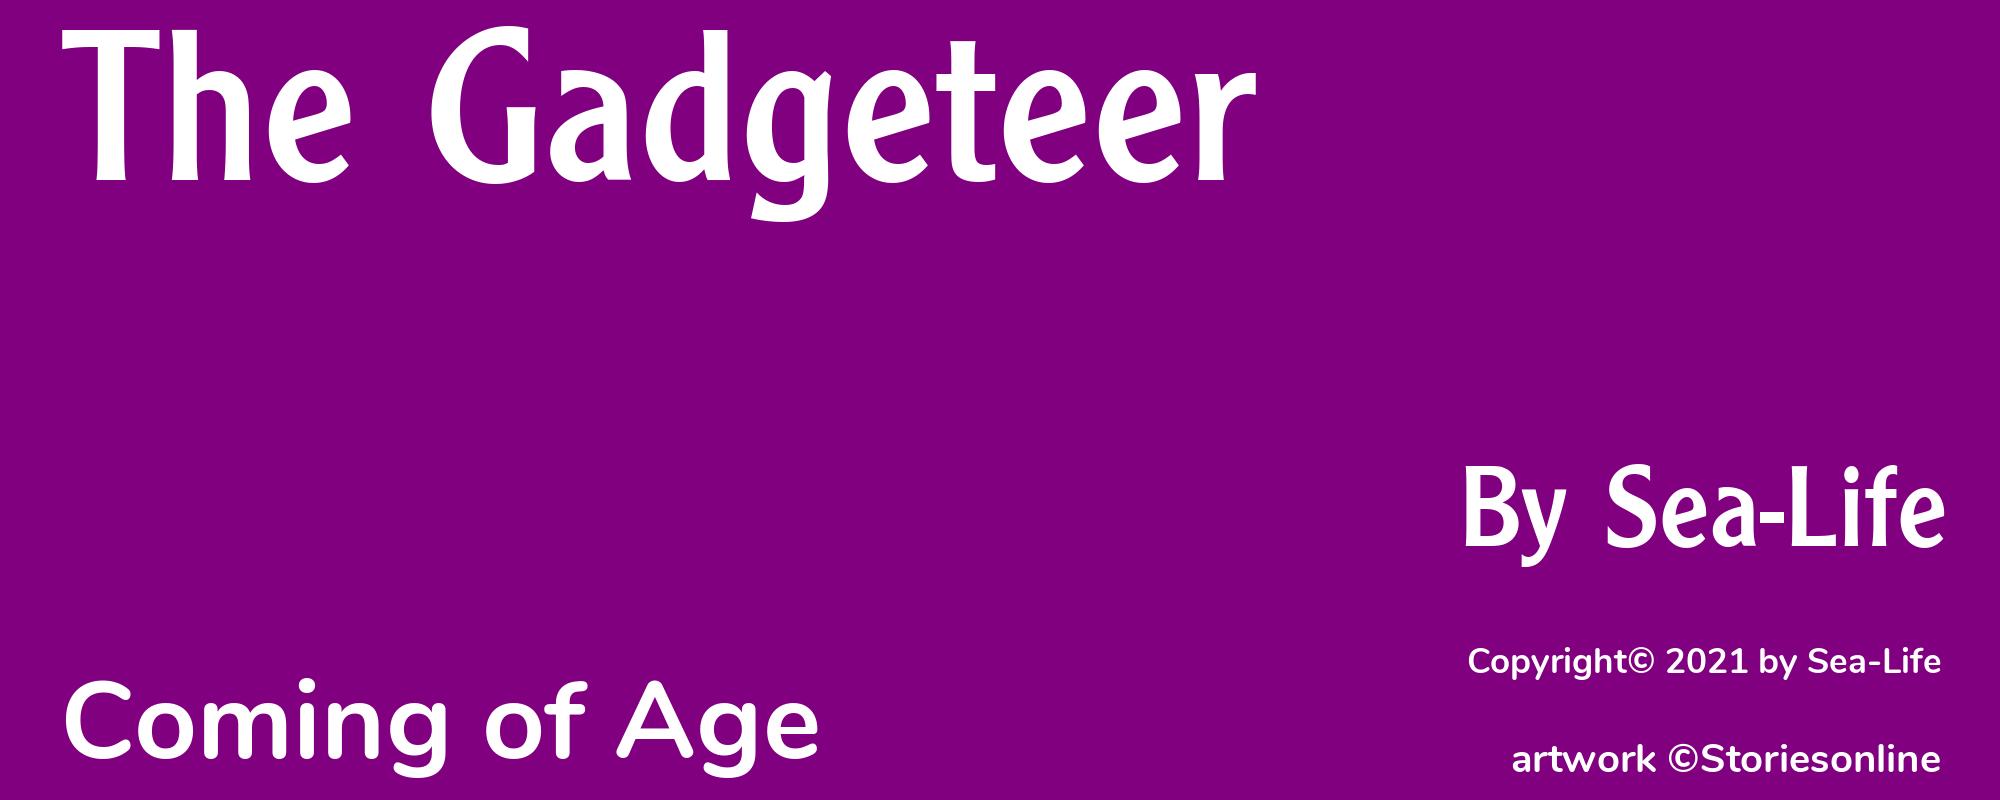 The Gadgeteer - Cover